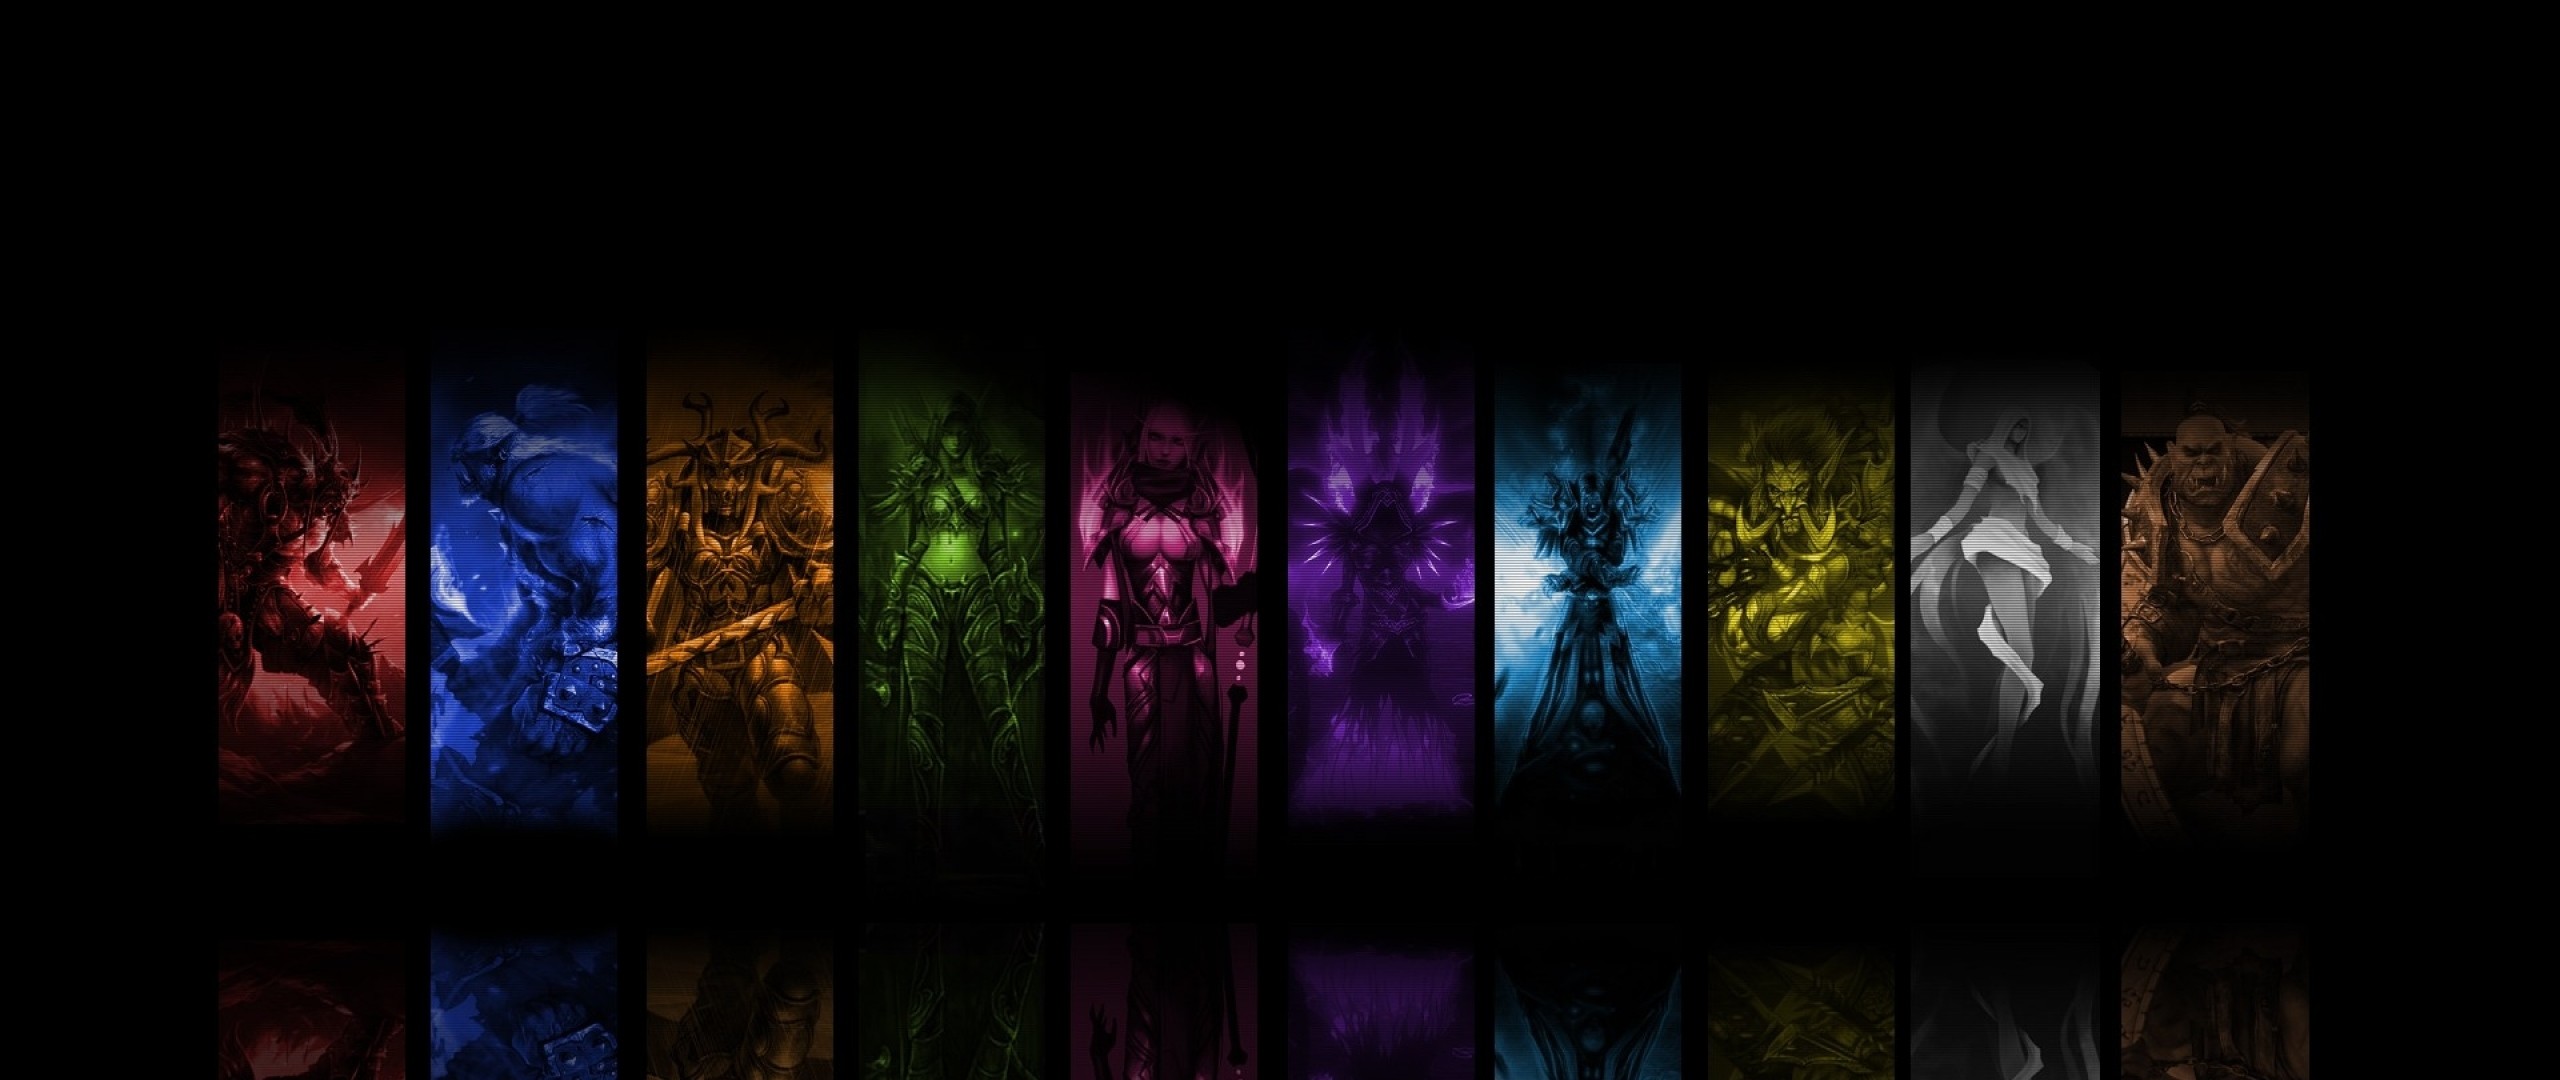 2560x1080  Wallpaper world of warcraft, priest mage, shots, photos,  characters, fan